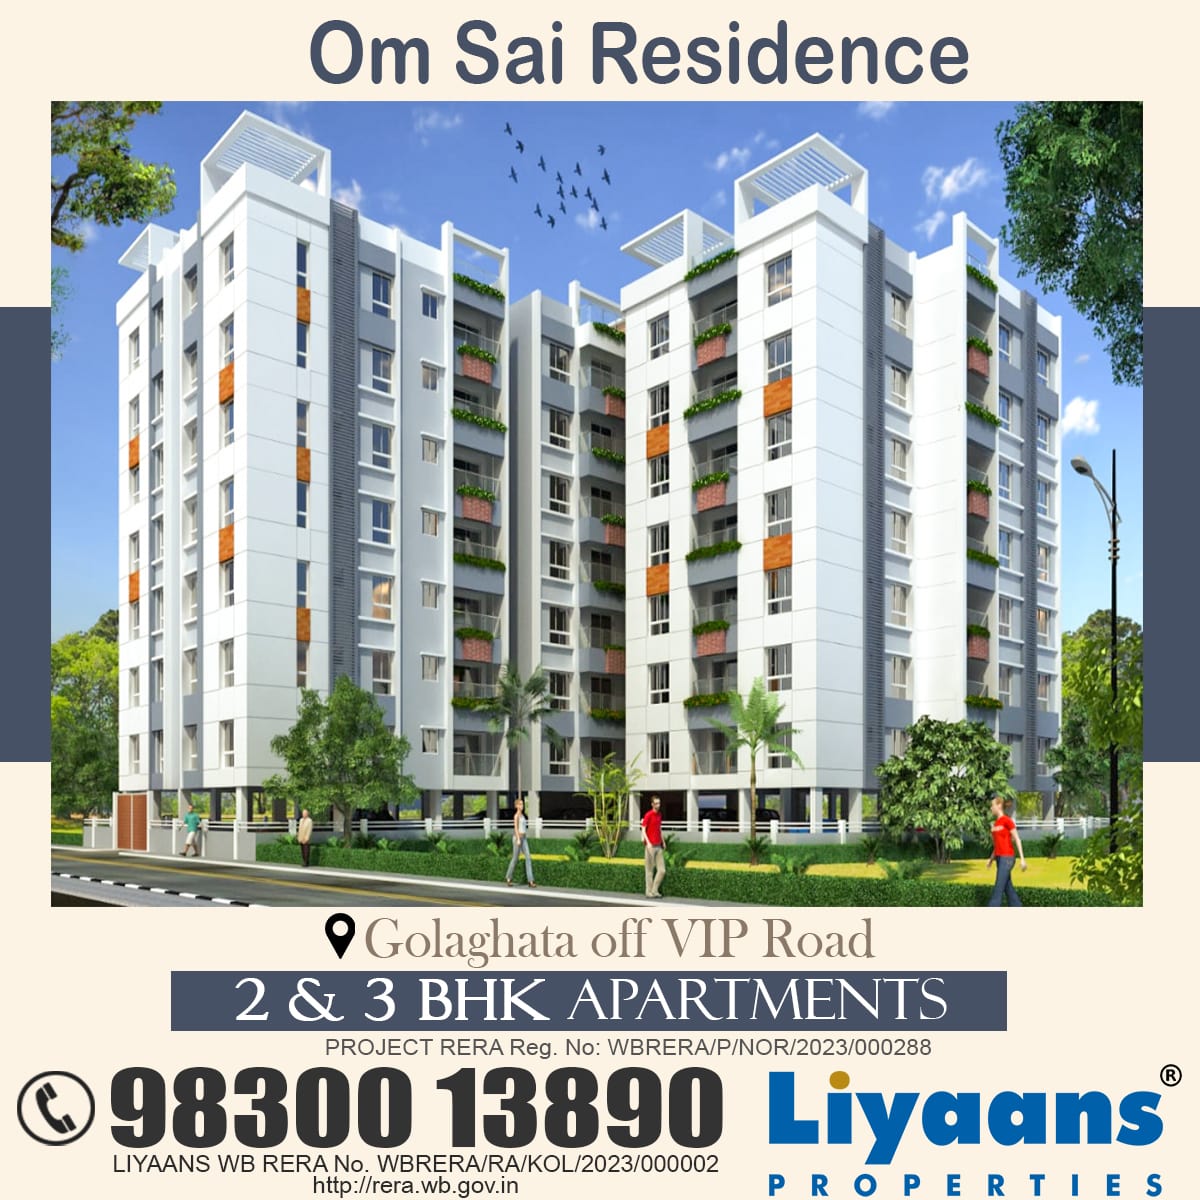 Discover your dream home at Om Sai Residence! Located in the heart of the city, this luxurious residential complex offers spacious apartments with modern amenities. Call now 9830013890 or visit : bit.ly/Om_Sai_Residen…

#OmSaiResidence #DreamHome #LuxuryLiving #ModernAmenities